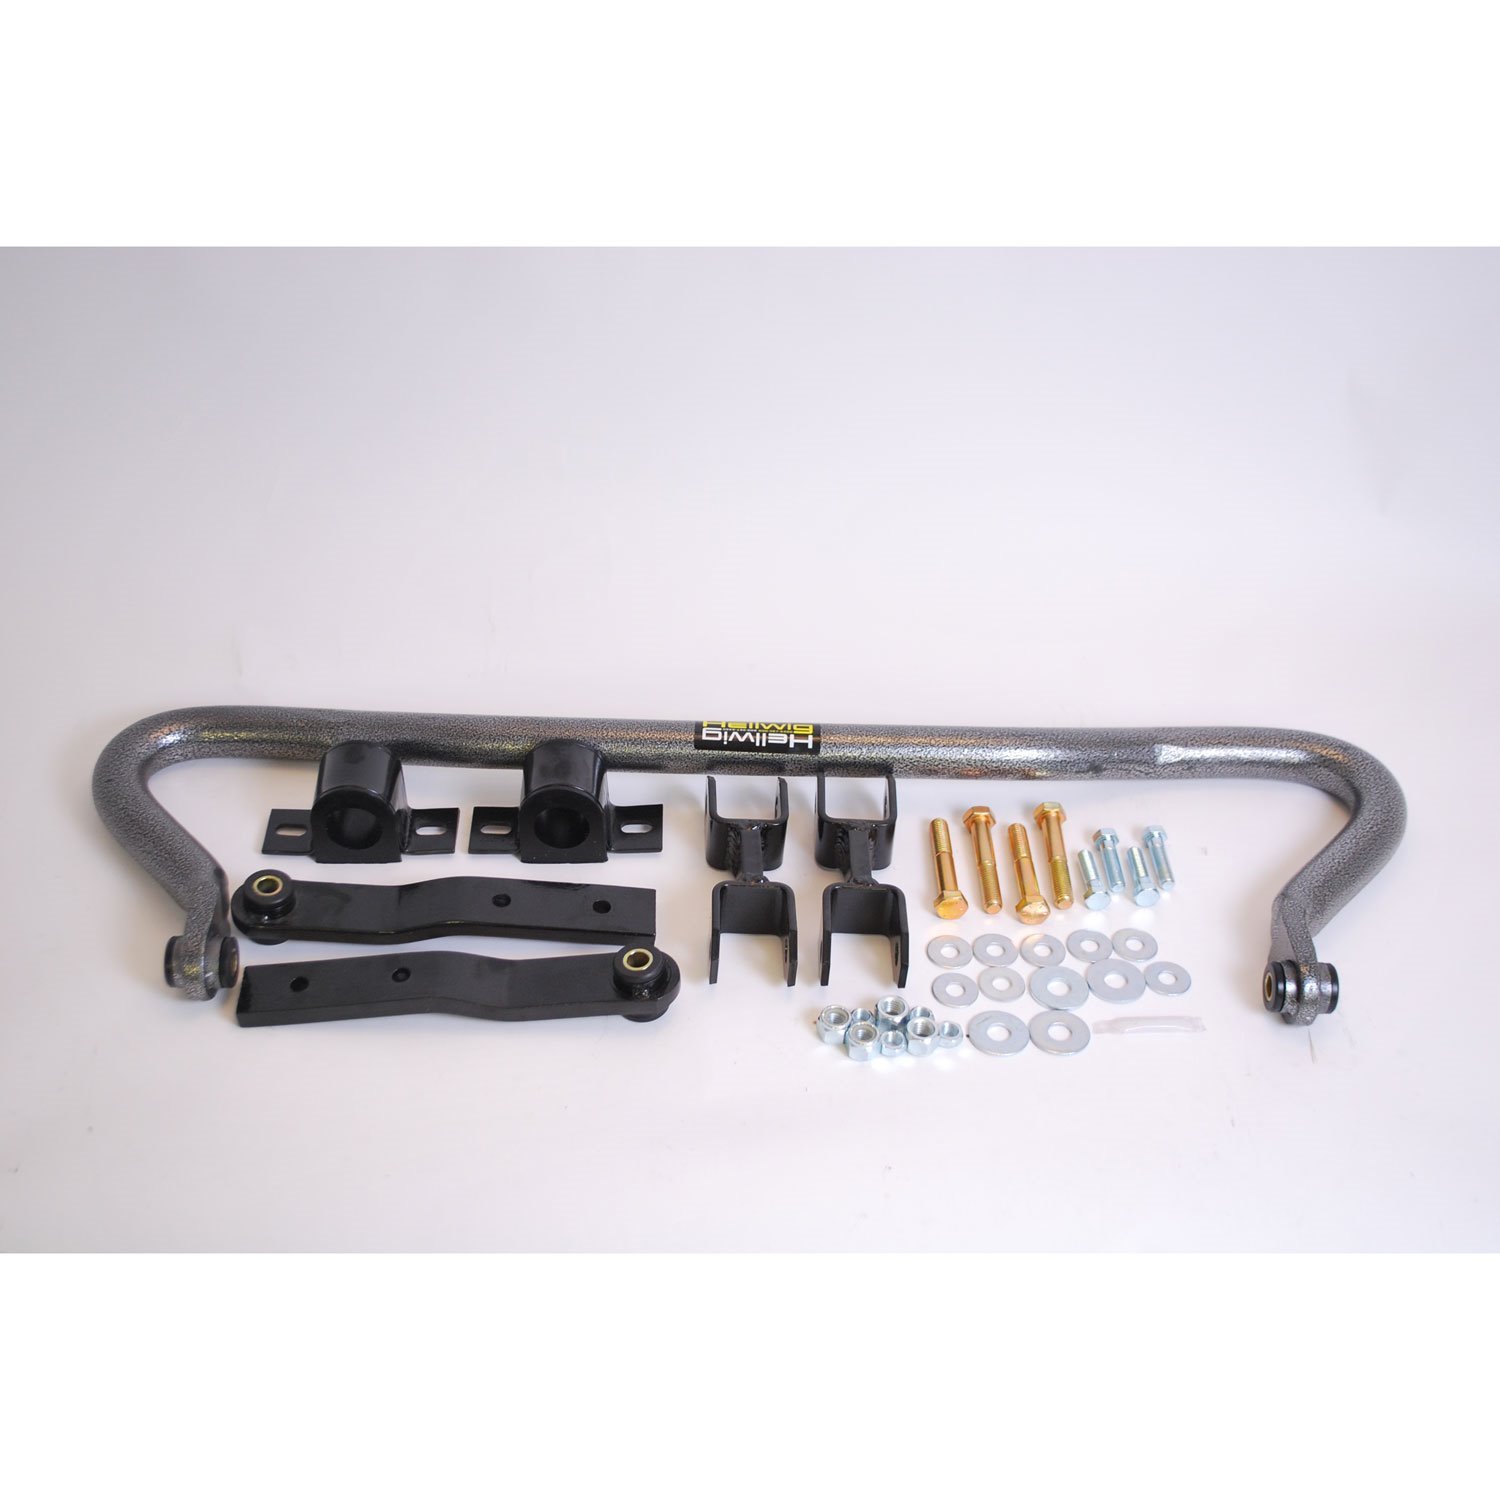 Rear Sway Bar for 2000-2012 Workhorse W20-22 Motorhome Chassis (Gas Engine Only)